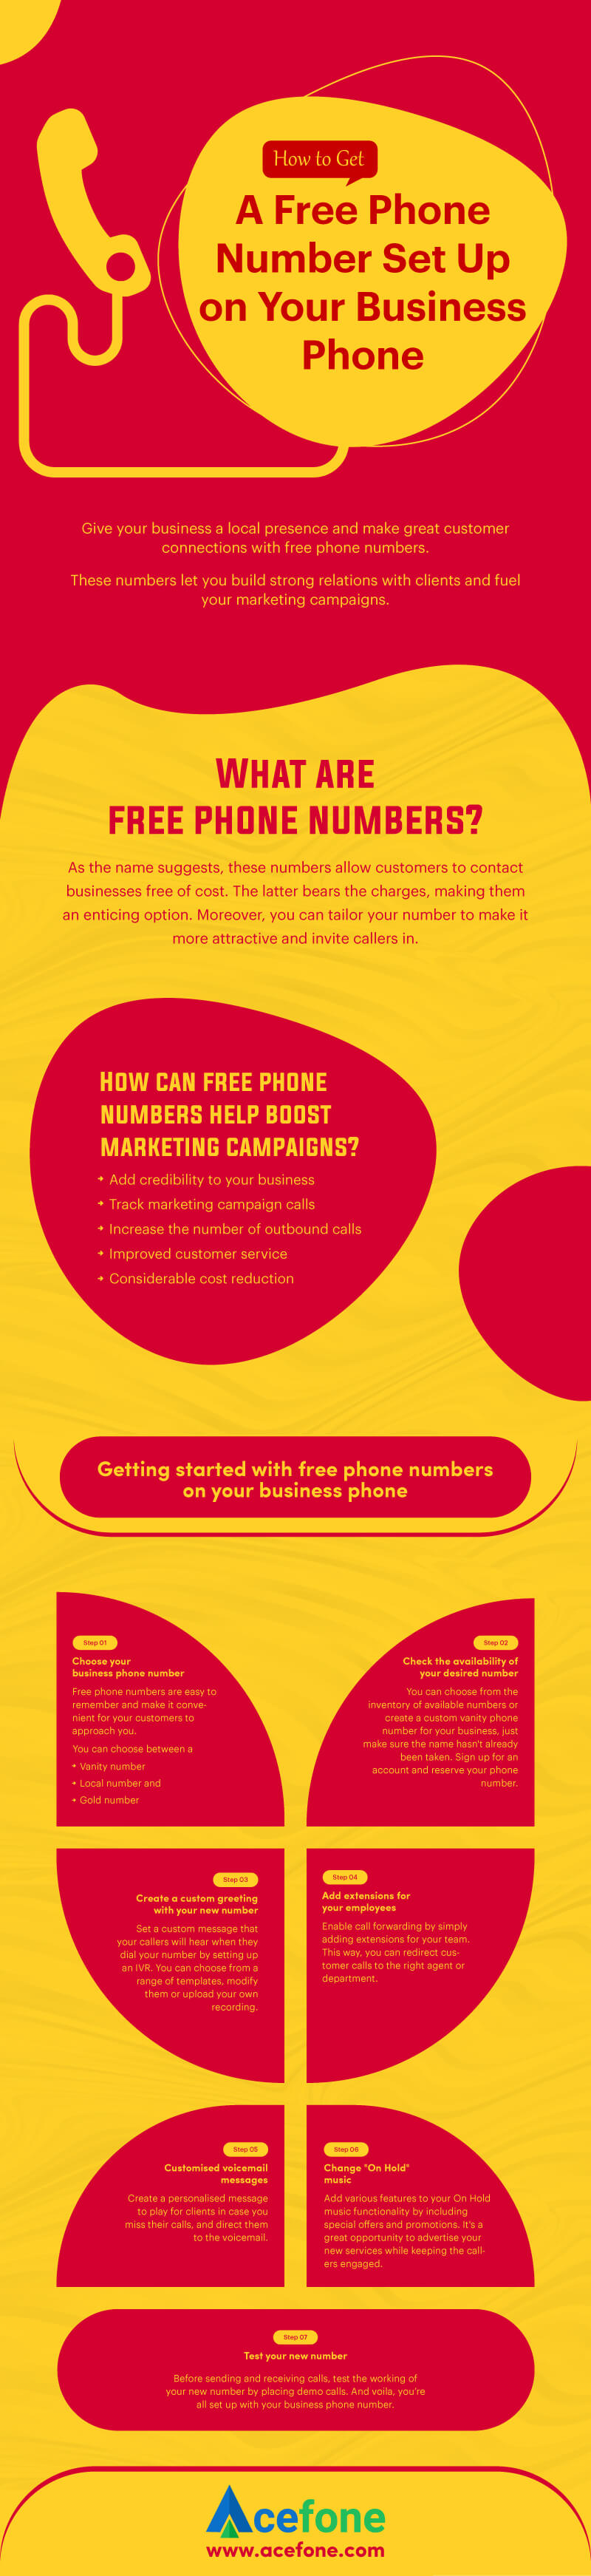 How To Get a Free Phone Number Setup On Your Business Phone - Infographic